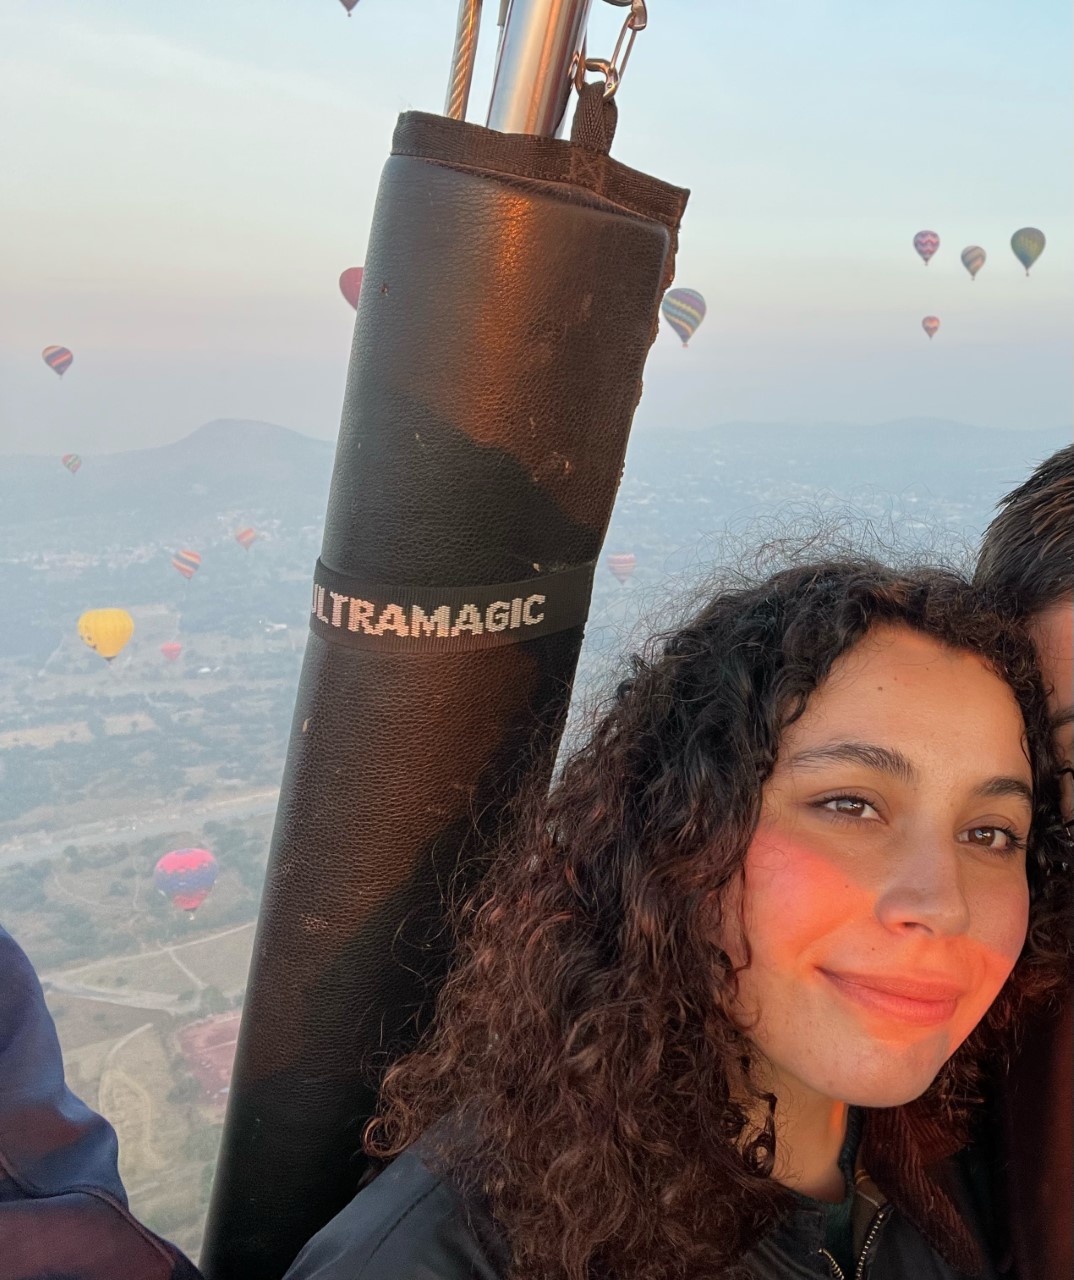 Photo of Jazmin Barajas in a hot air balloon. She has long curly dark hair and is smiling at the camera with hot air balloons in the distance.